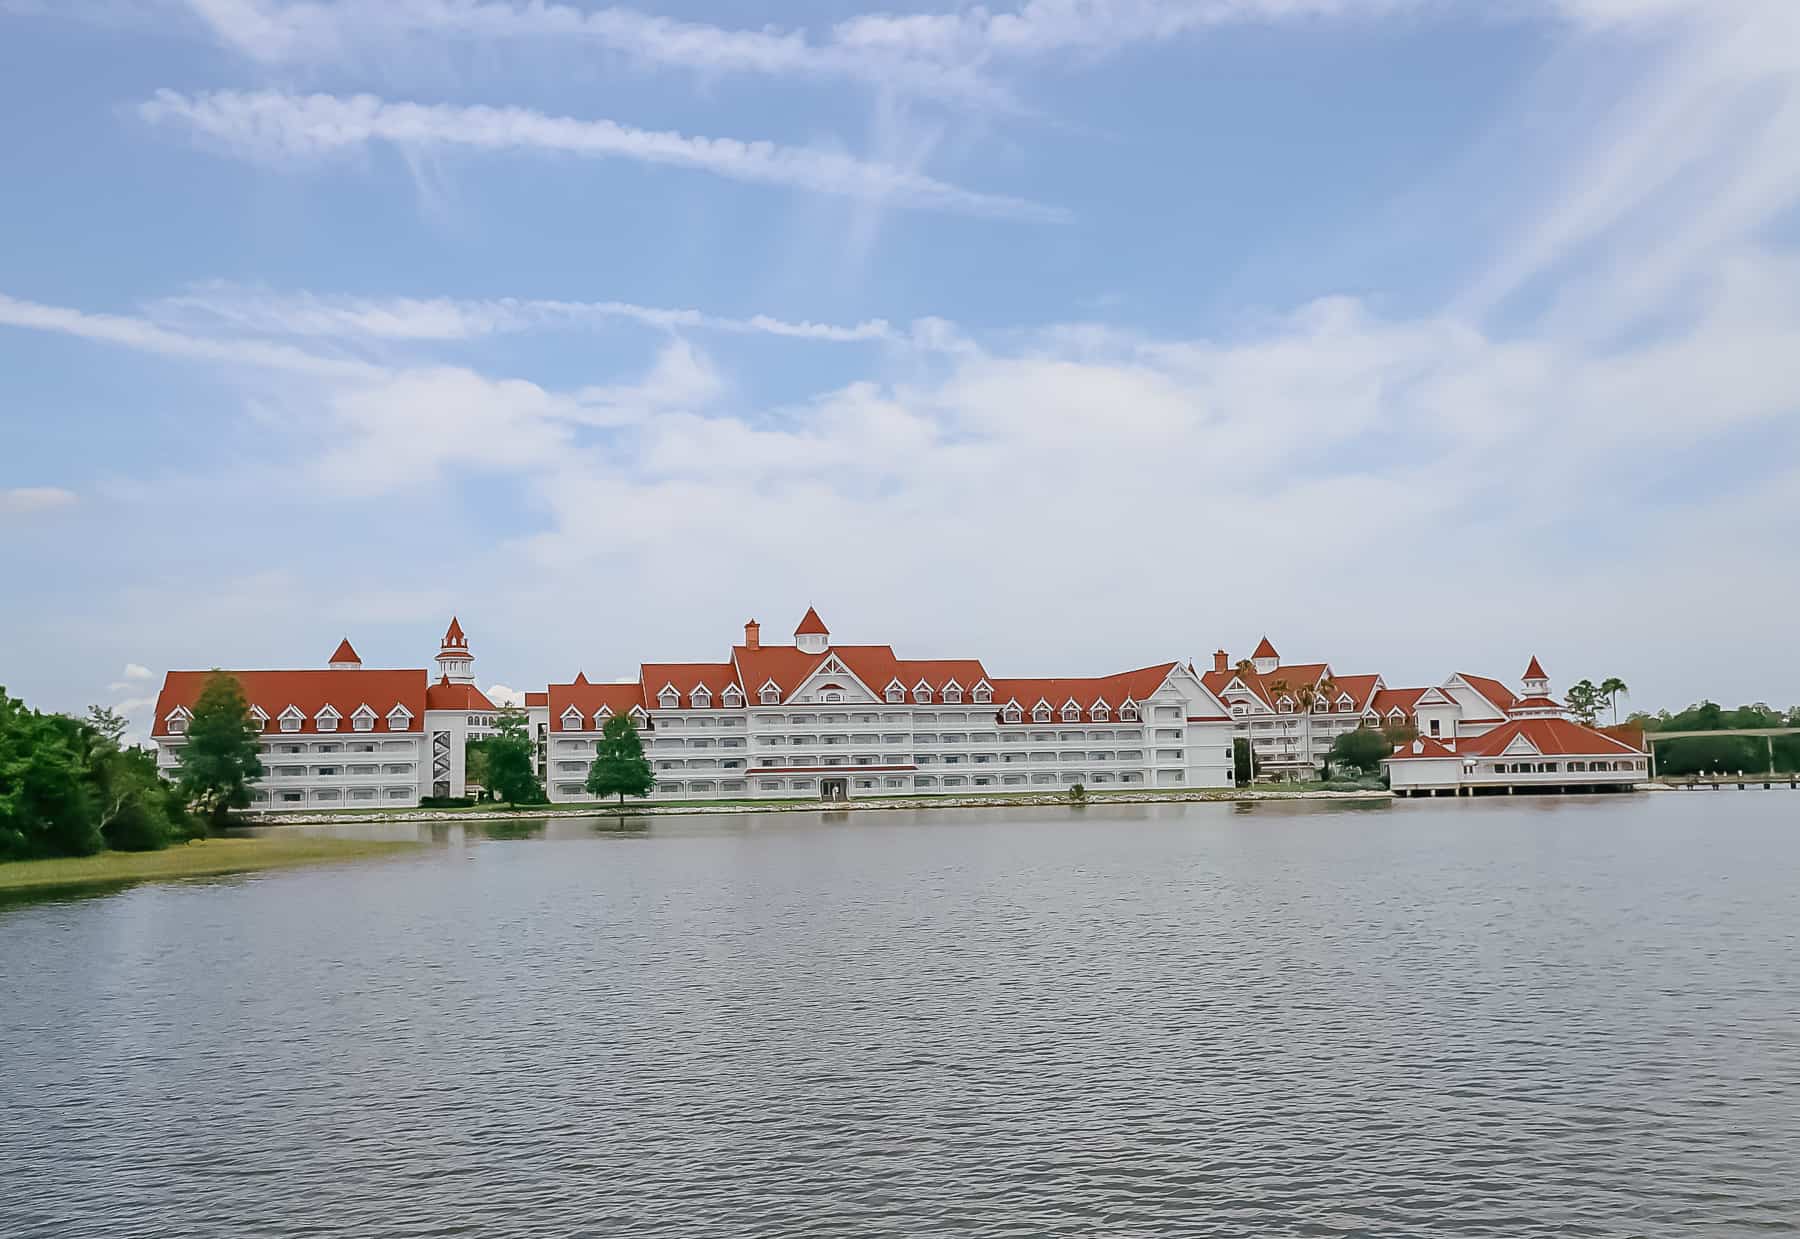 Disney’s Grand Floridian Transportation Options (Every Route from a Practiced Pro)